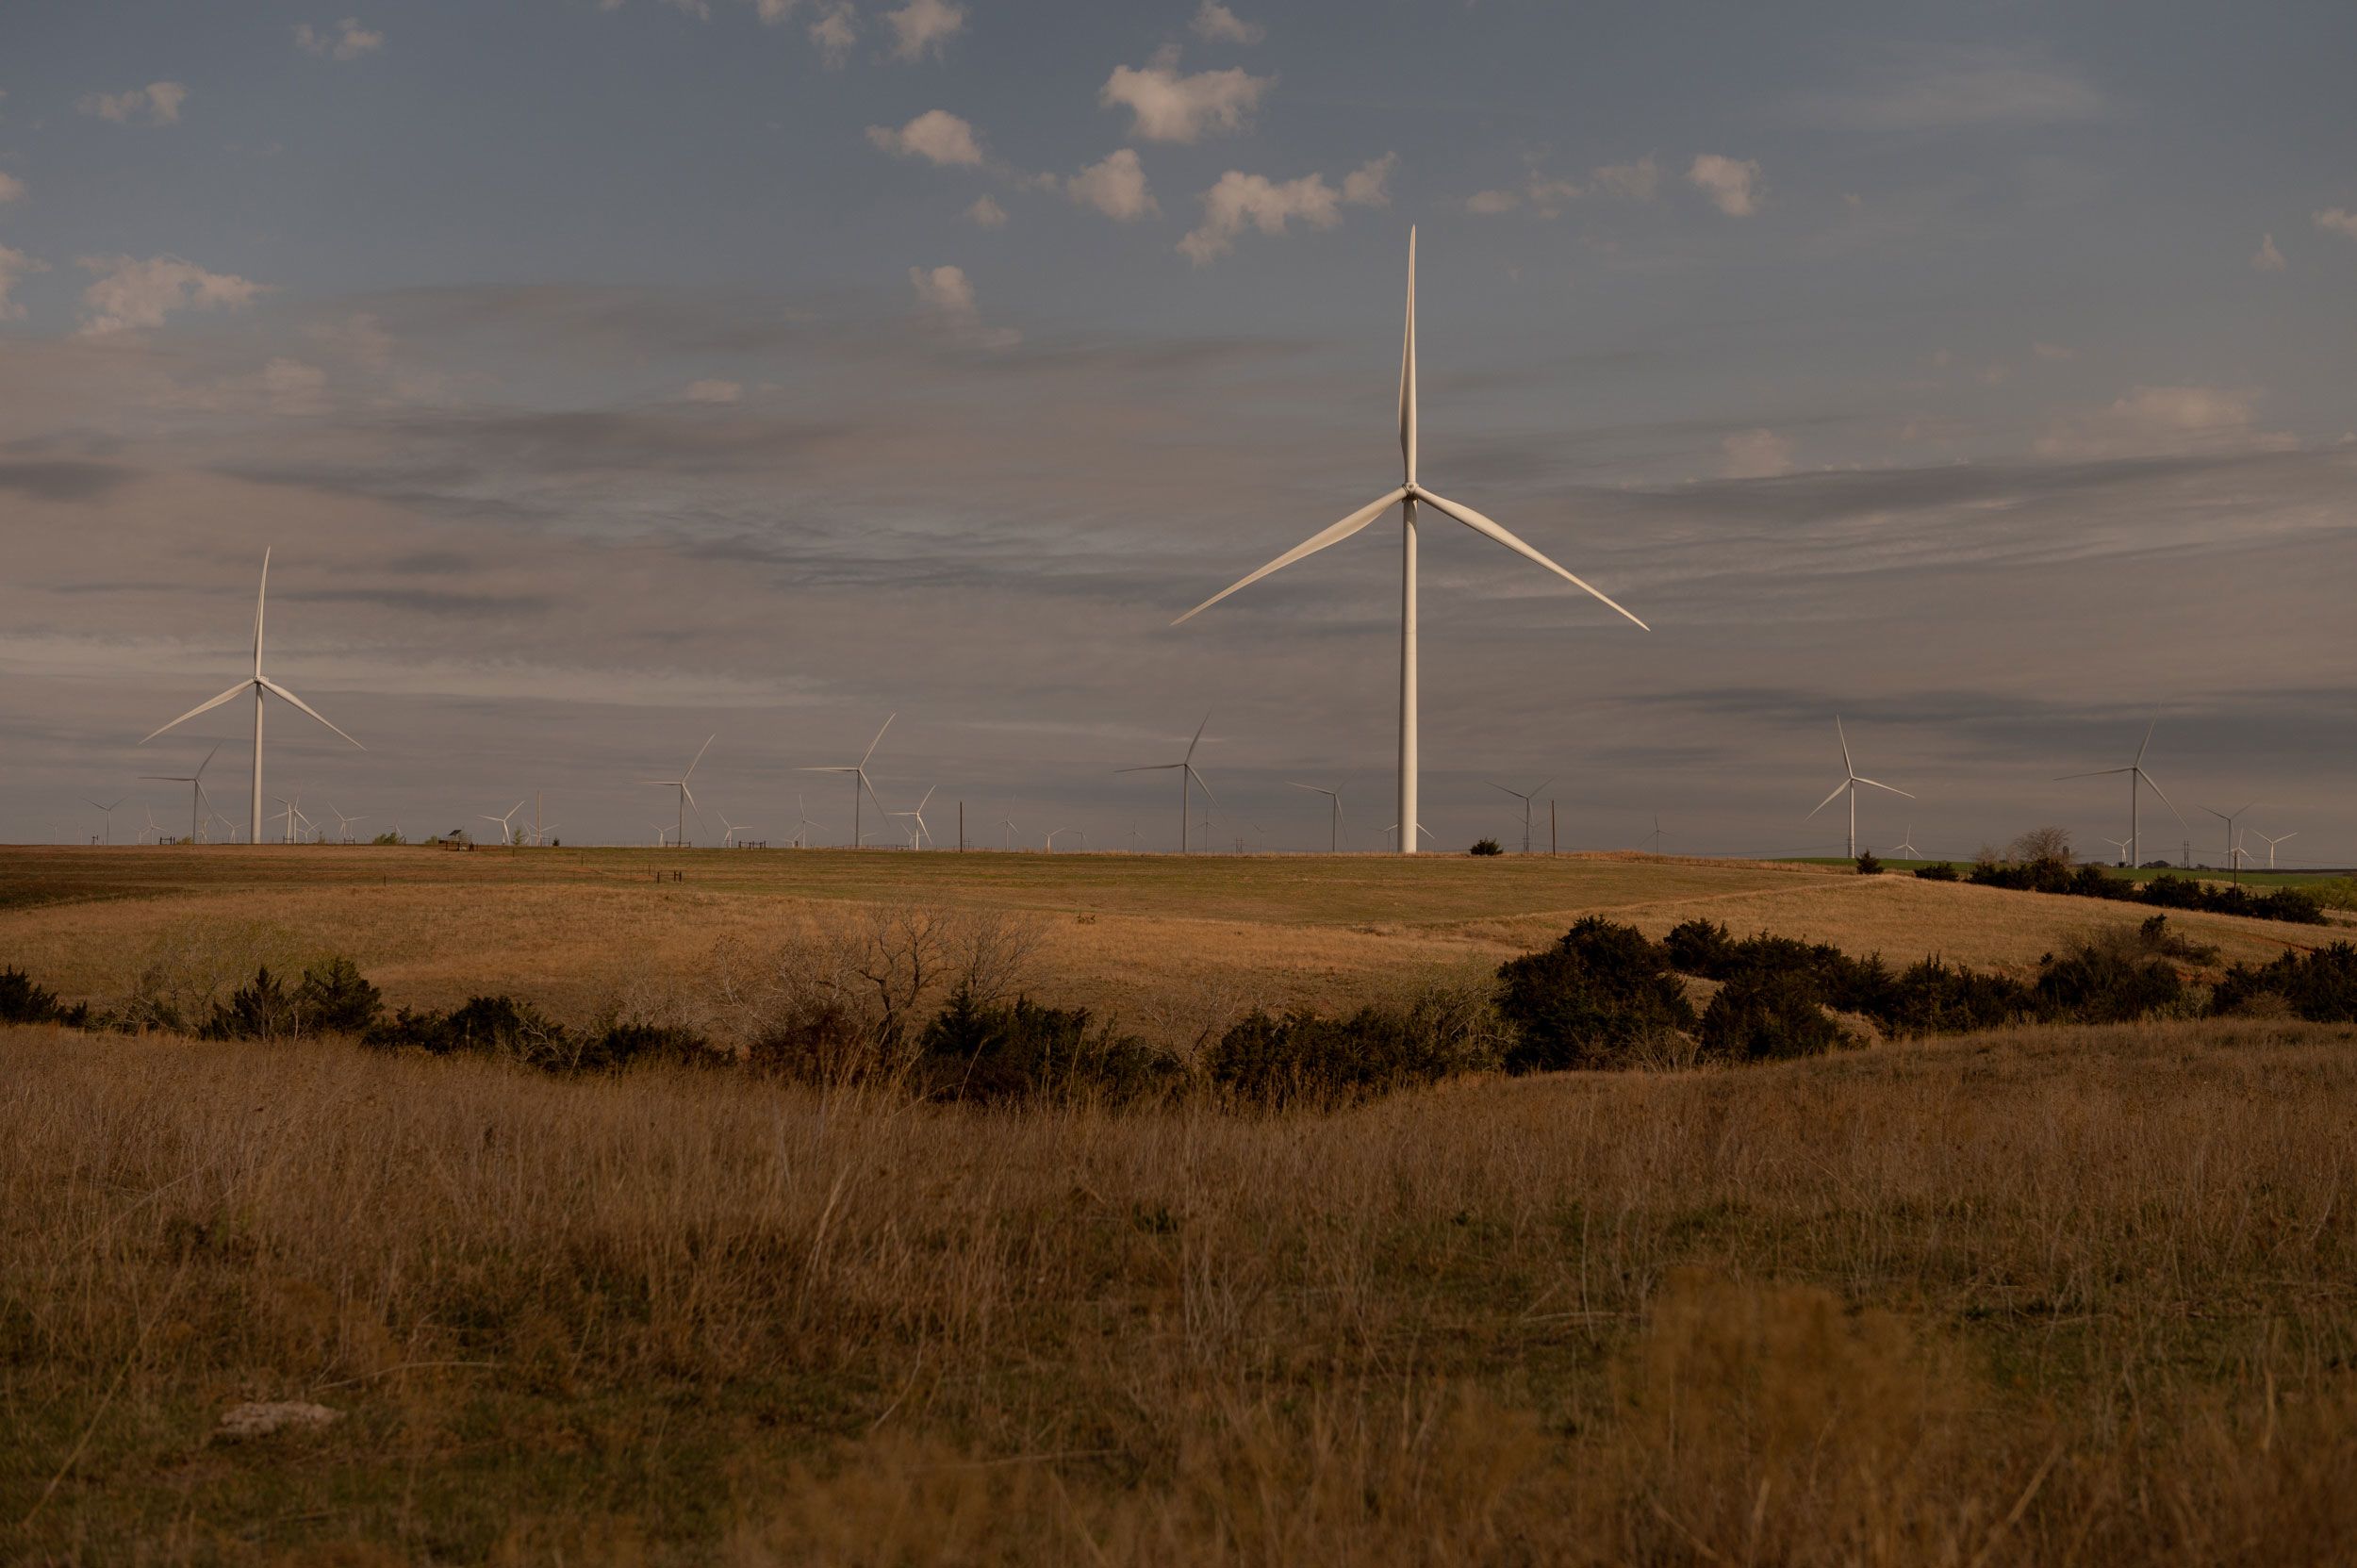 The wind-turbine industry should be booming. Why isn't it?